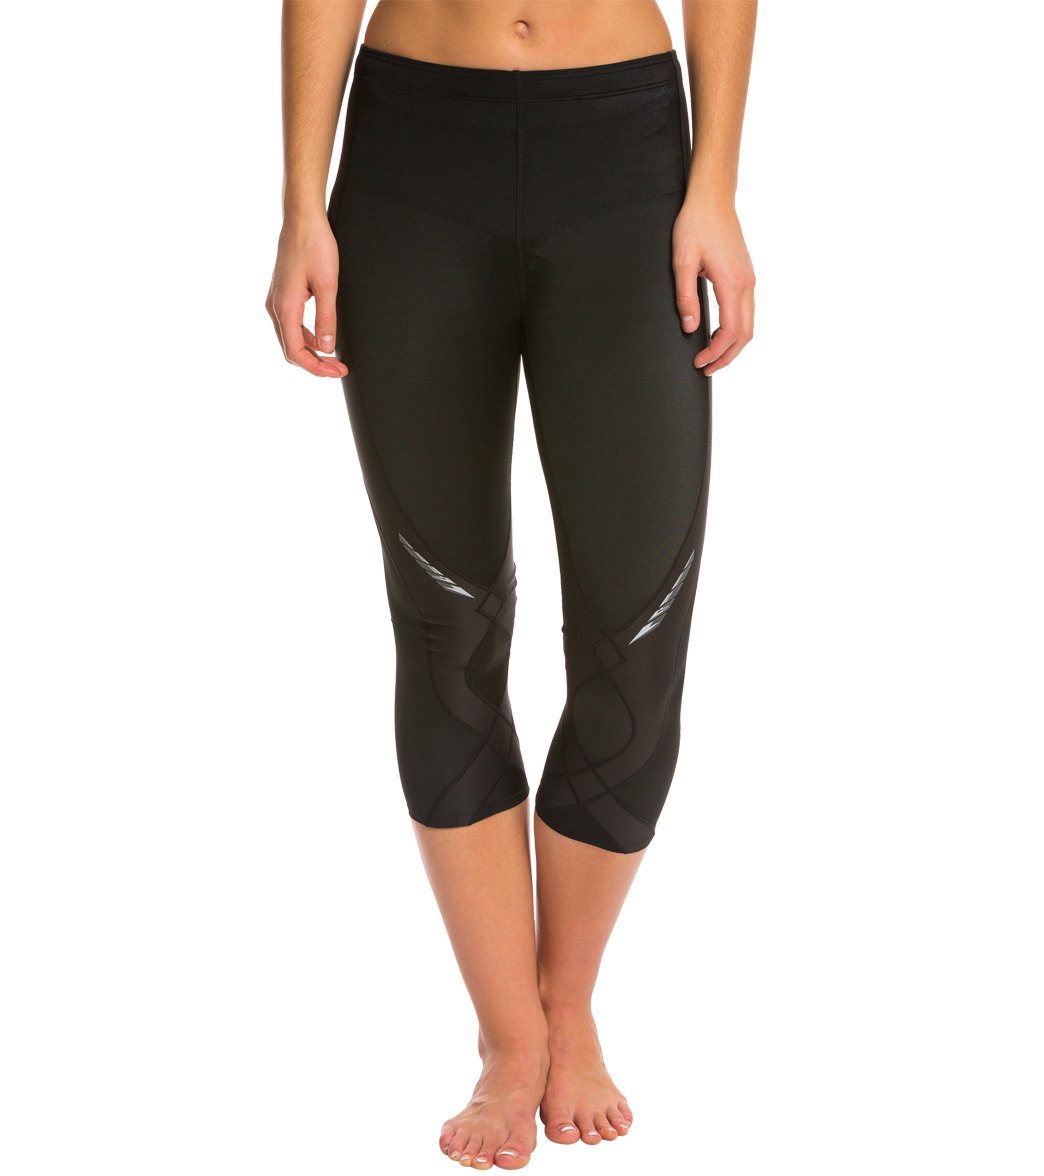 CW-X Women's Stabilyx 3/4 Length Tight at SwimOutlet.com - Free Shipping